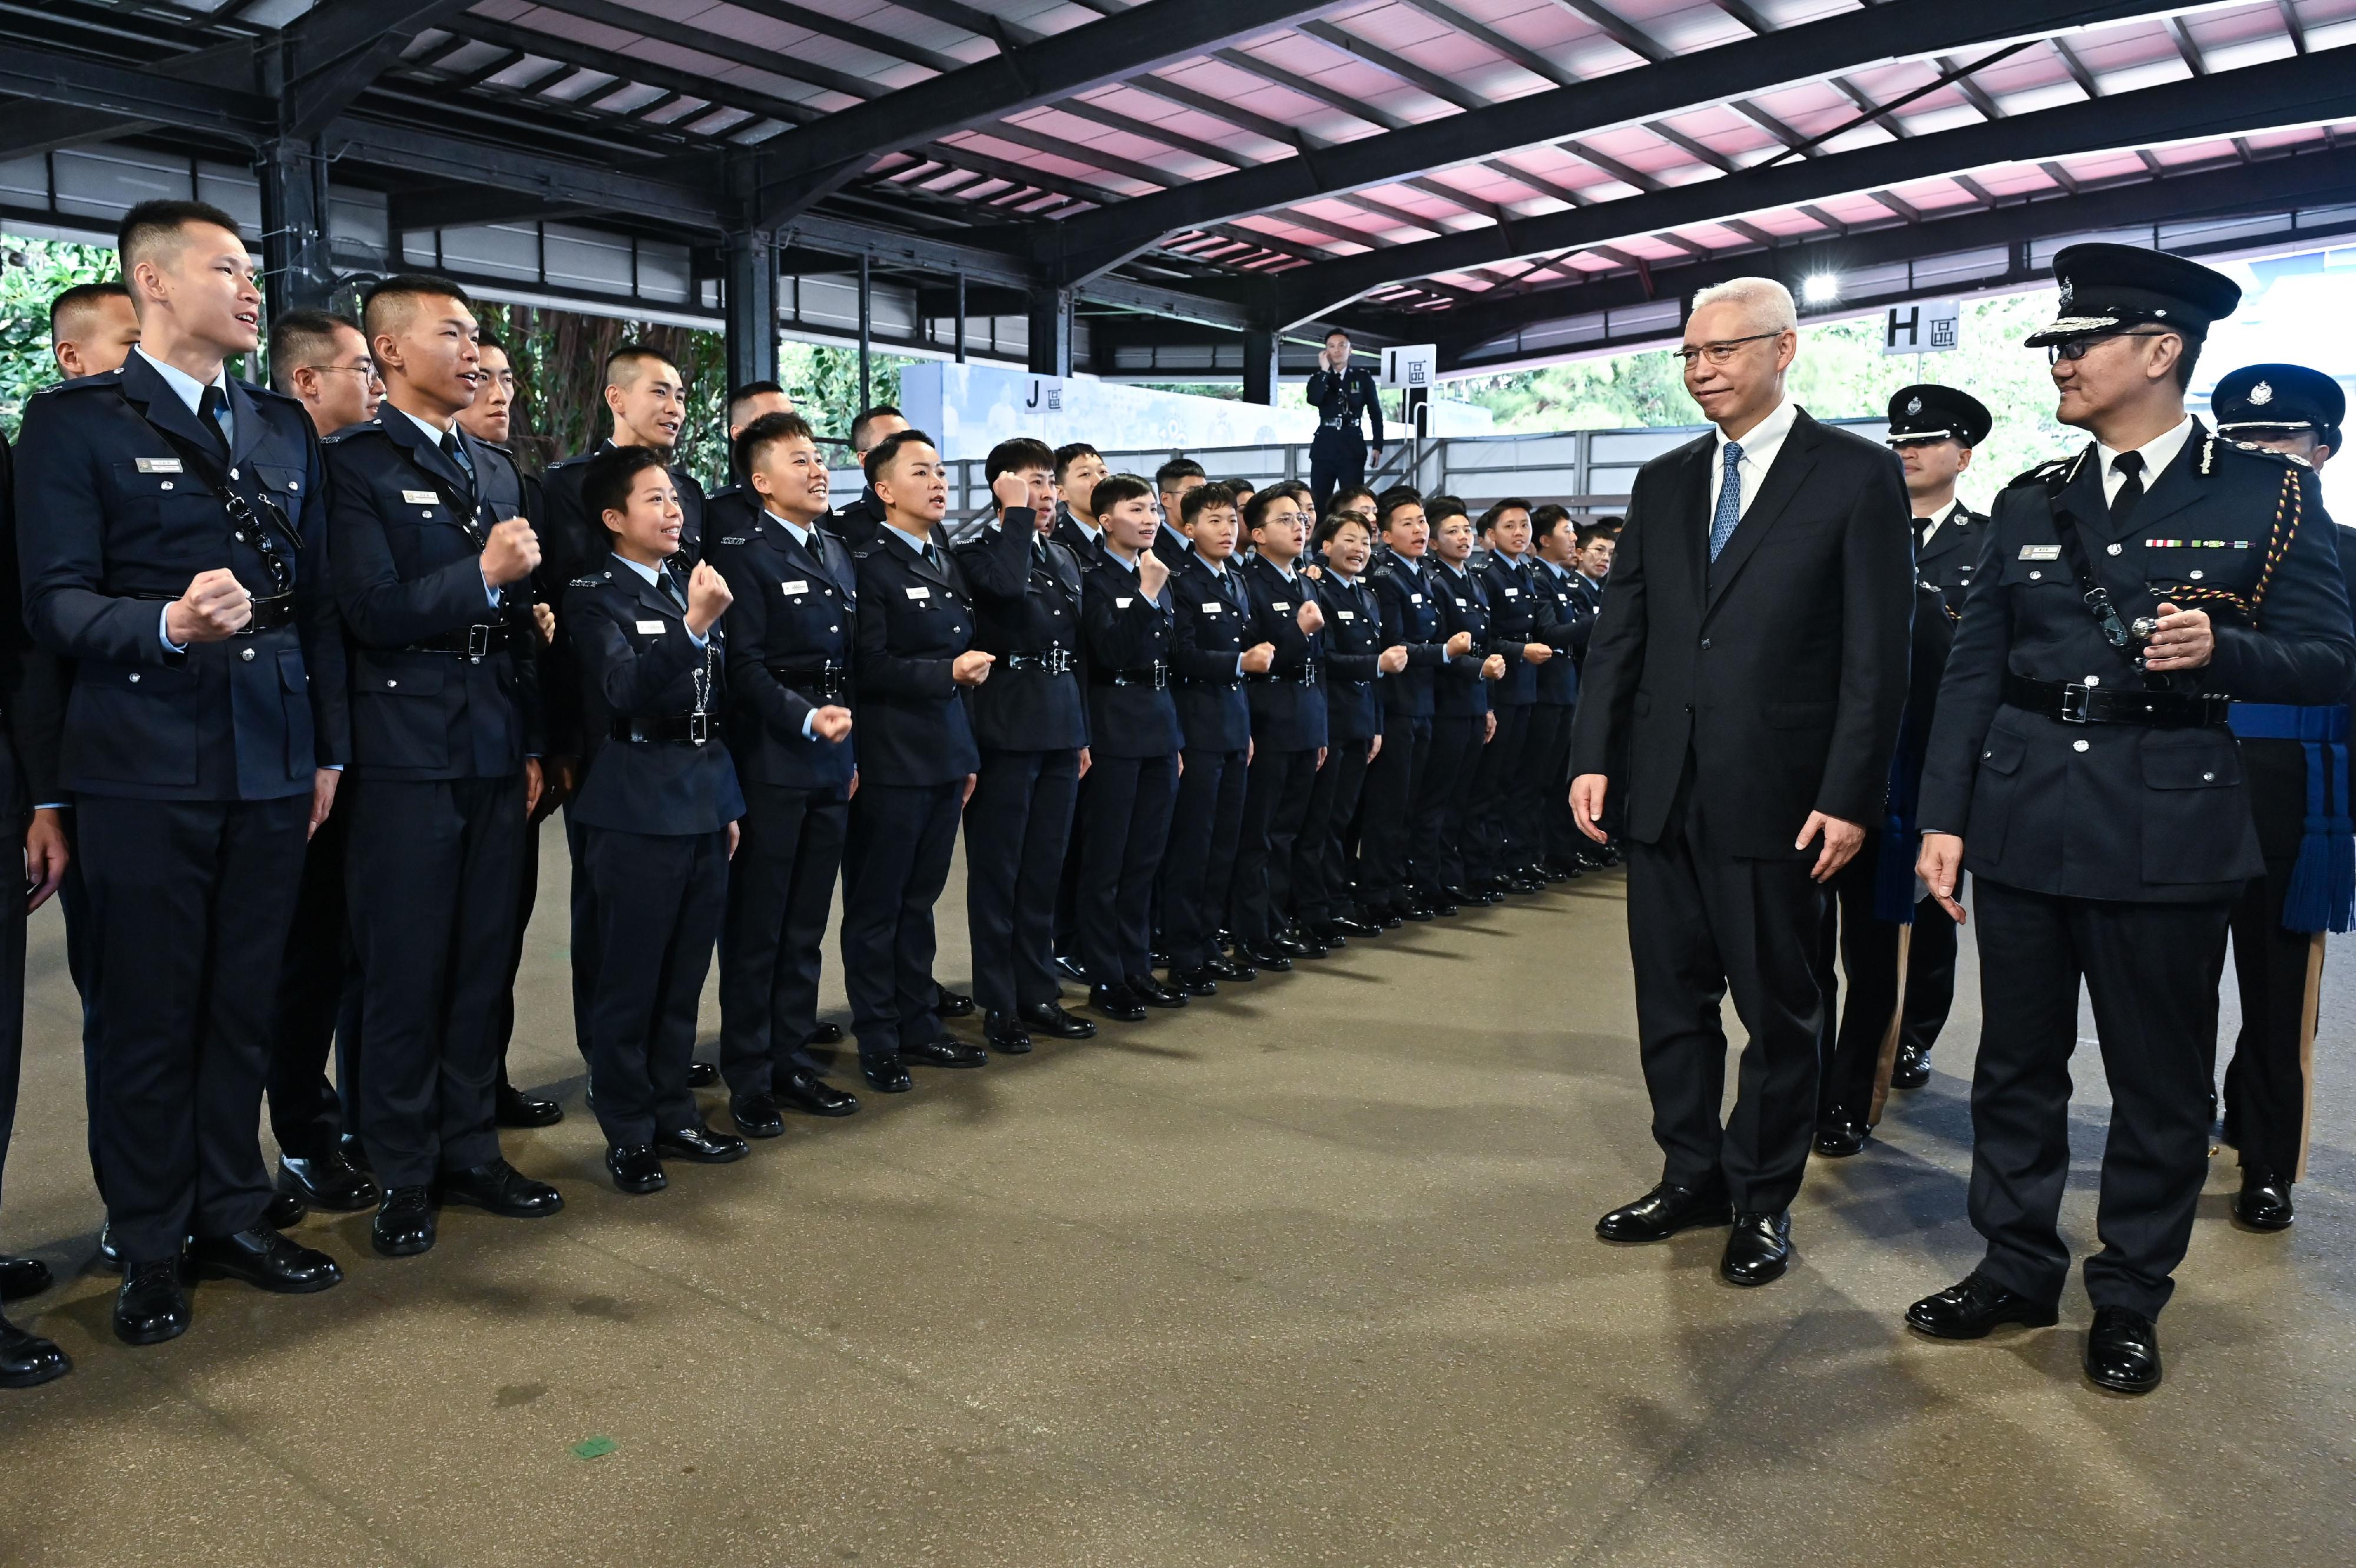 The Non-executive Chairman of MTR Corporation Limited, Dr Rex Auyeung Pak-kuen (front row, second right), accompanied by the Commissioner of Police, Mr Siu Chak-yee (front row, first right), meets graduates after the passing-out parade held at the Hong Kong Police College today (February 3).